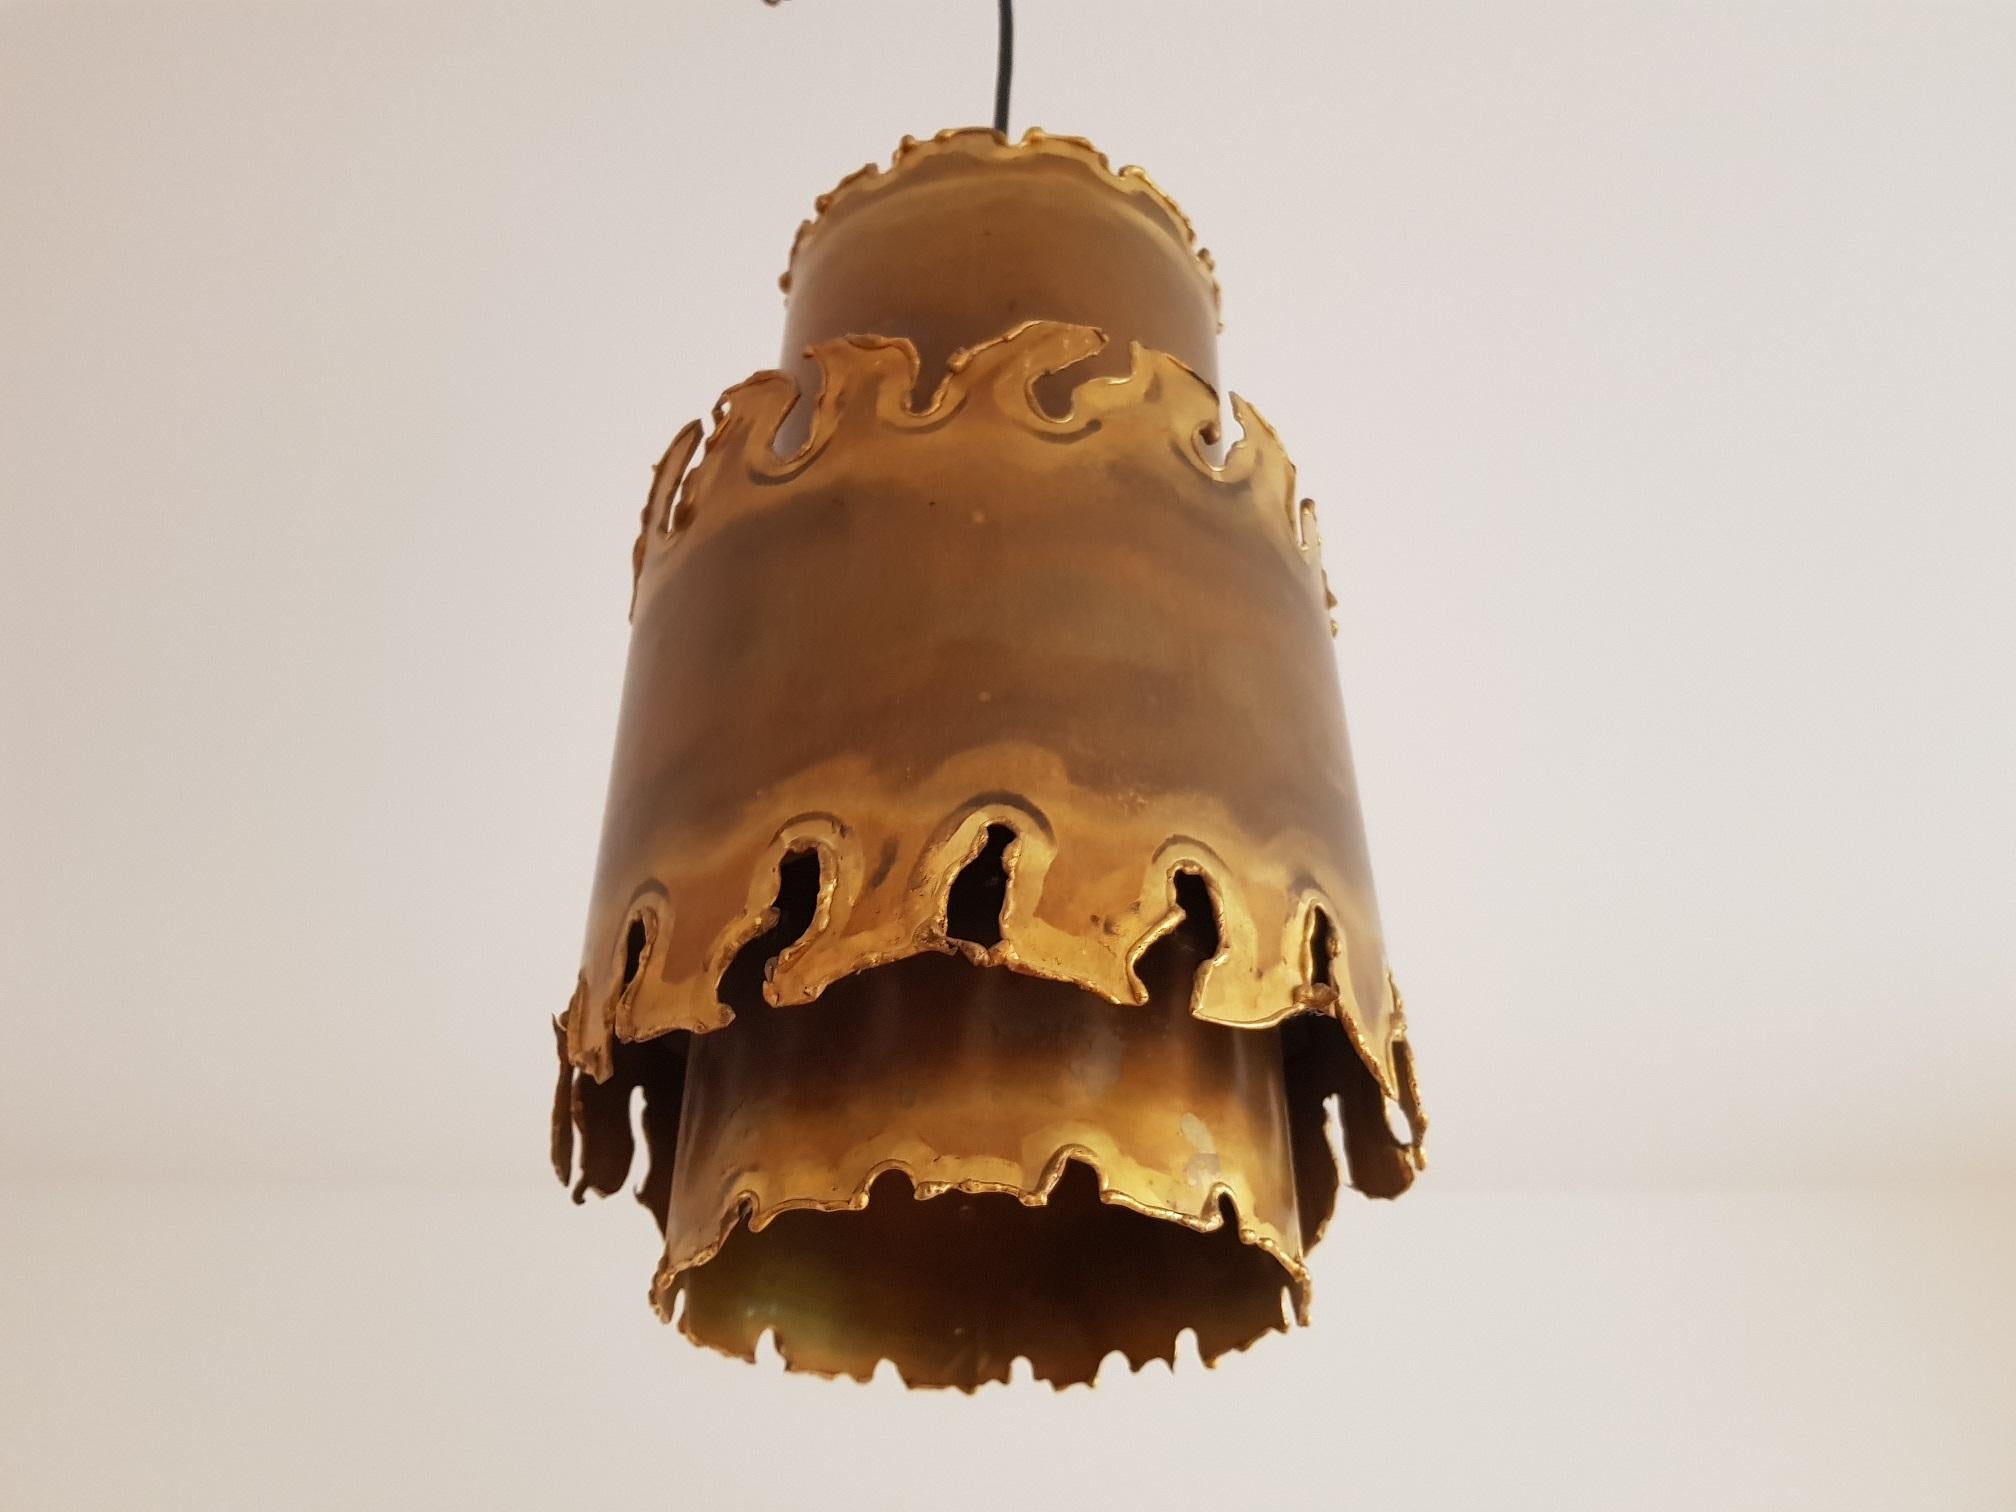 2 vintage cylindrical pendant lights in acid treated brass from the Brutalist series. Produced by Holm Sorensen & Co in Denmark in the 1960s. Designed by Danish artist Svend Aage Holm Sorensen. Iconic design and a proud contribution to the